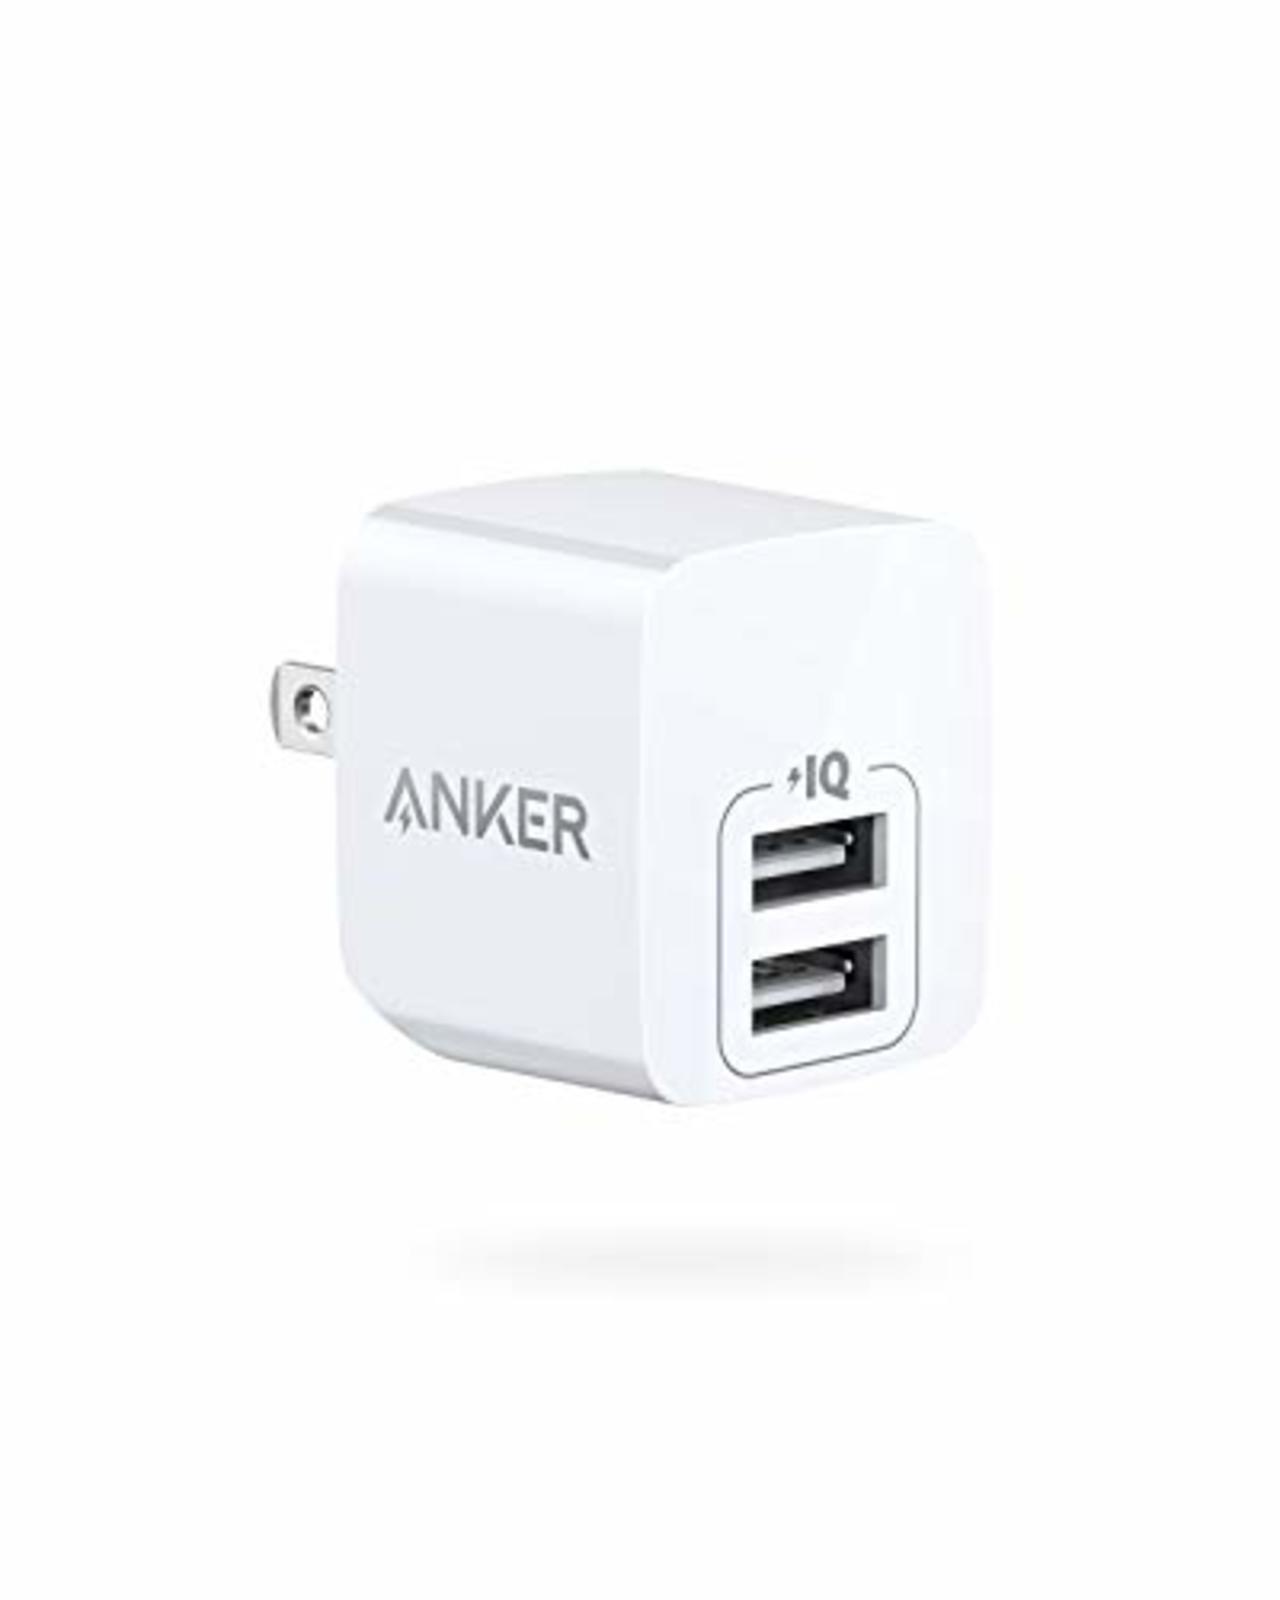 Anker charger PowerPort mini 12W 2-port USB rapid PSE authenticated F/S w/Track#